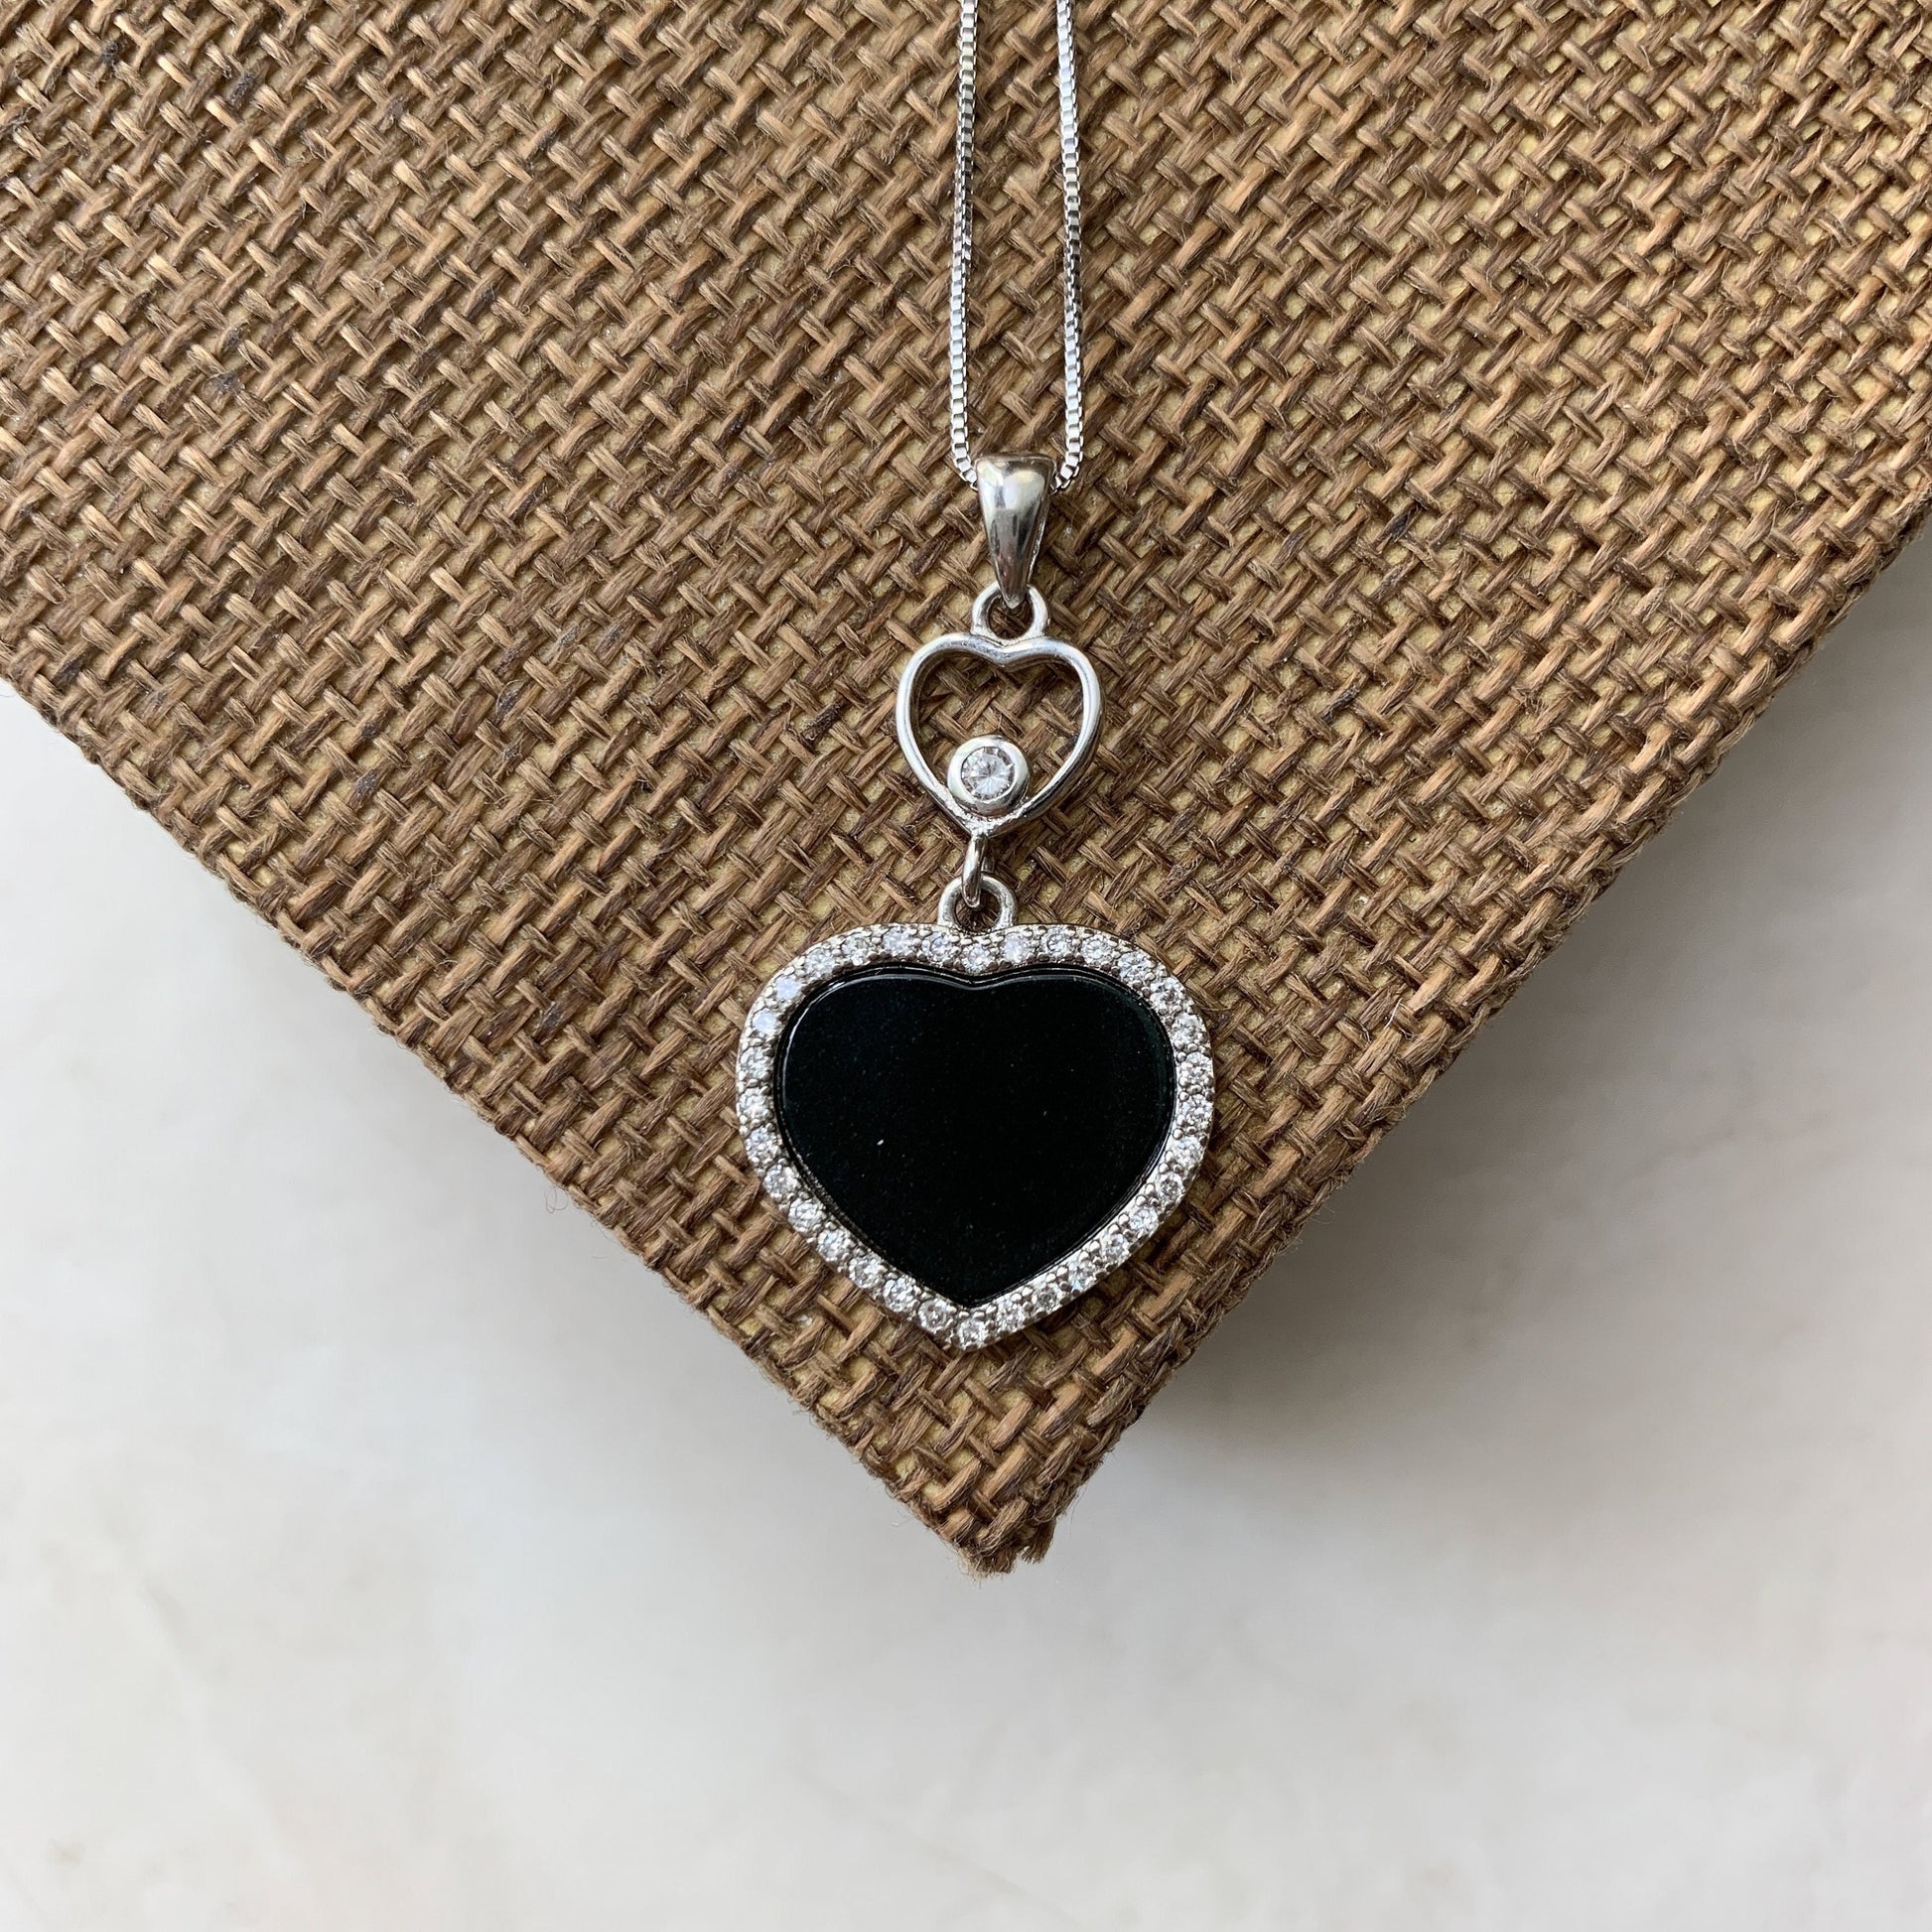 Black Jadeite Jade Omphacite Heart Sterling Silver Necklace, ZH-0921-1646459633 - AriaDesignCollection